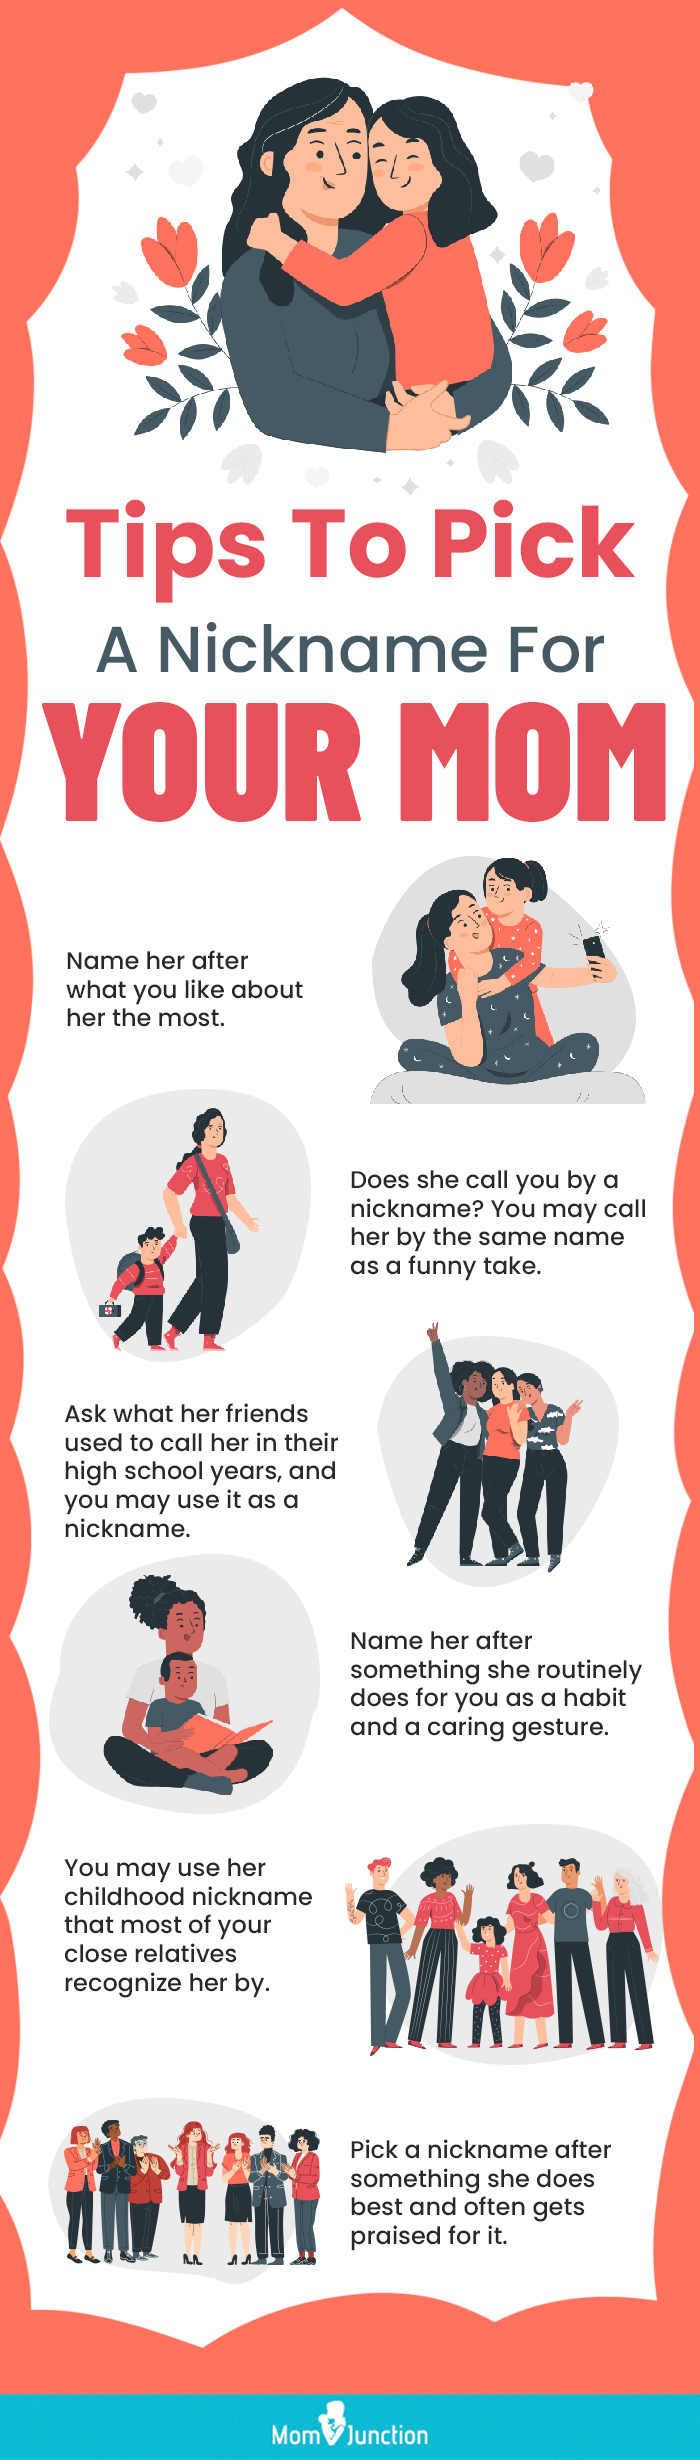 tips to pick a nickname for your mom (infographic)